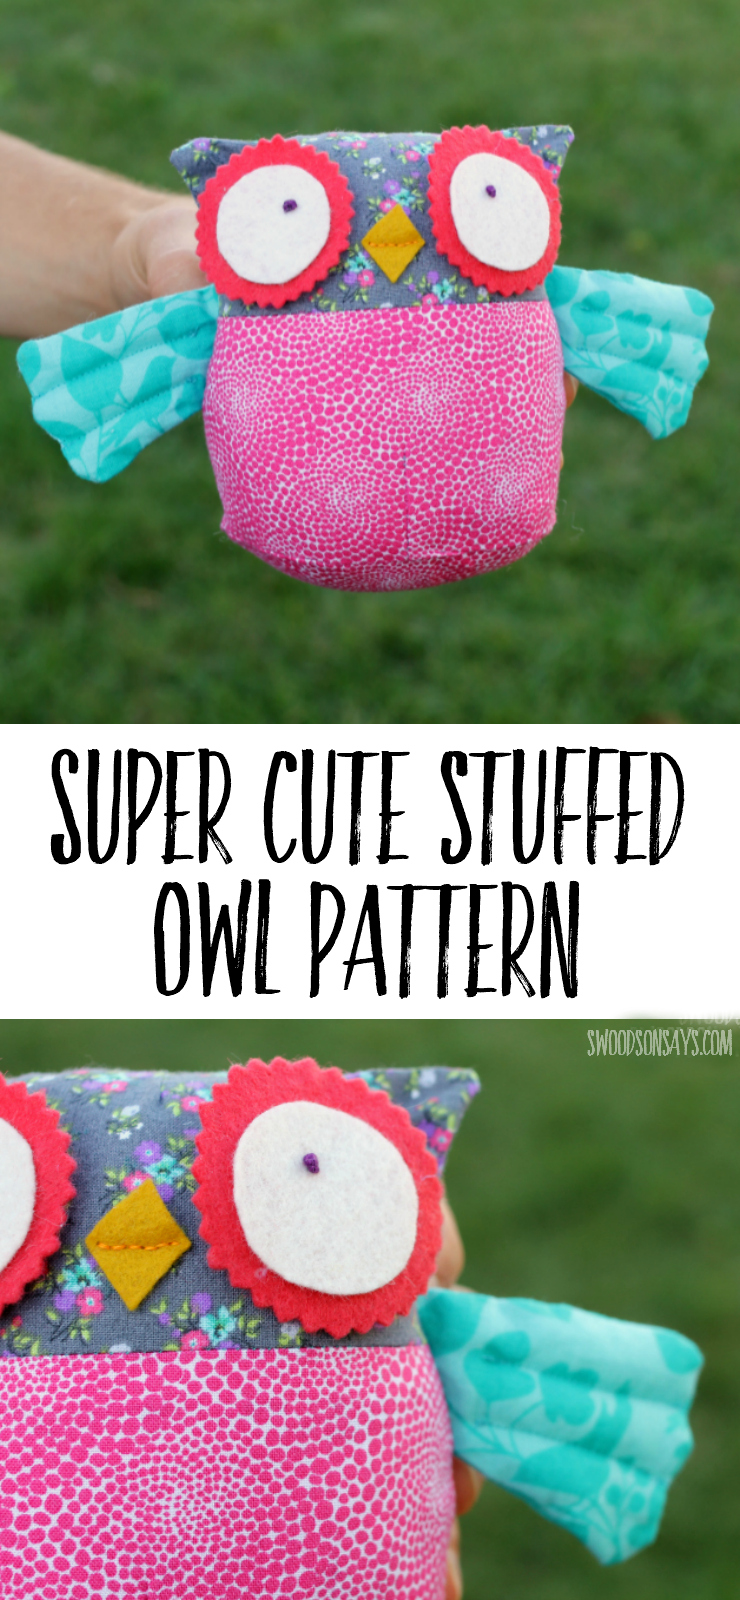 Check out this sweet stuffed owl pattern designed by Abby Glassenberg Design! Quick to sew and fun to hug, this owl softie sewing pattern is perfect for gift giving. #owlsoftie #owlpattern#plushowl #owlstuffie